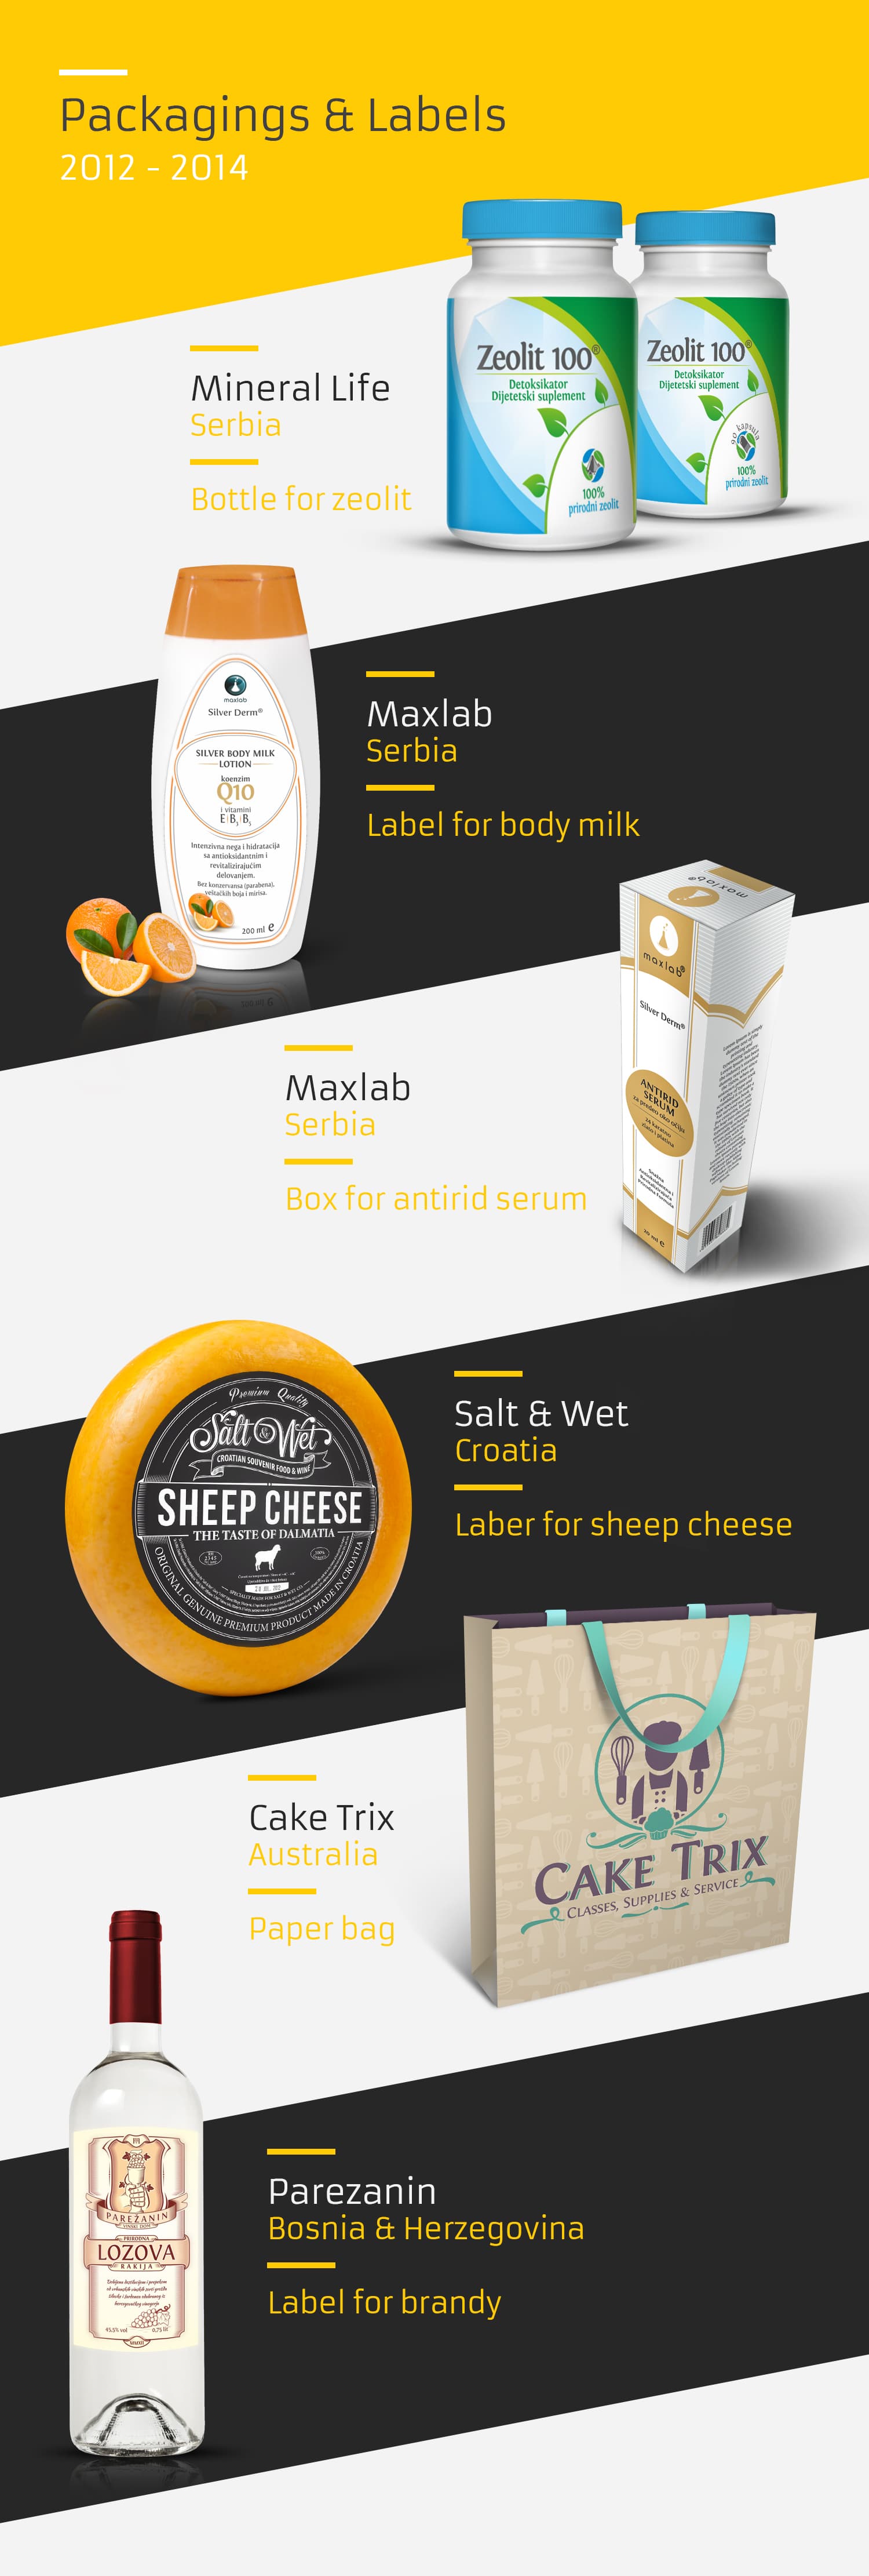 packaging and labels 2012-2014